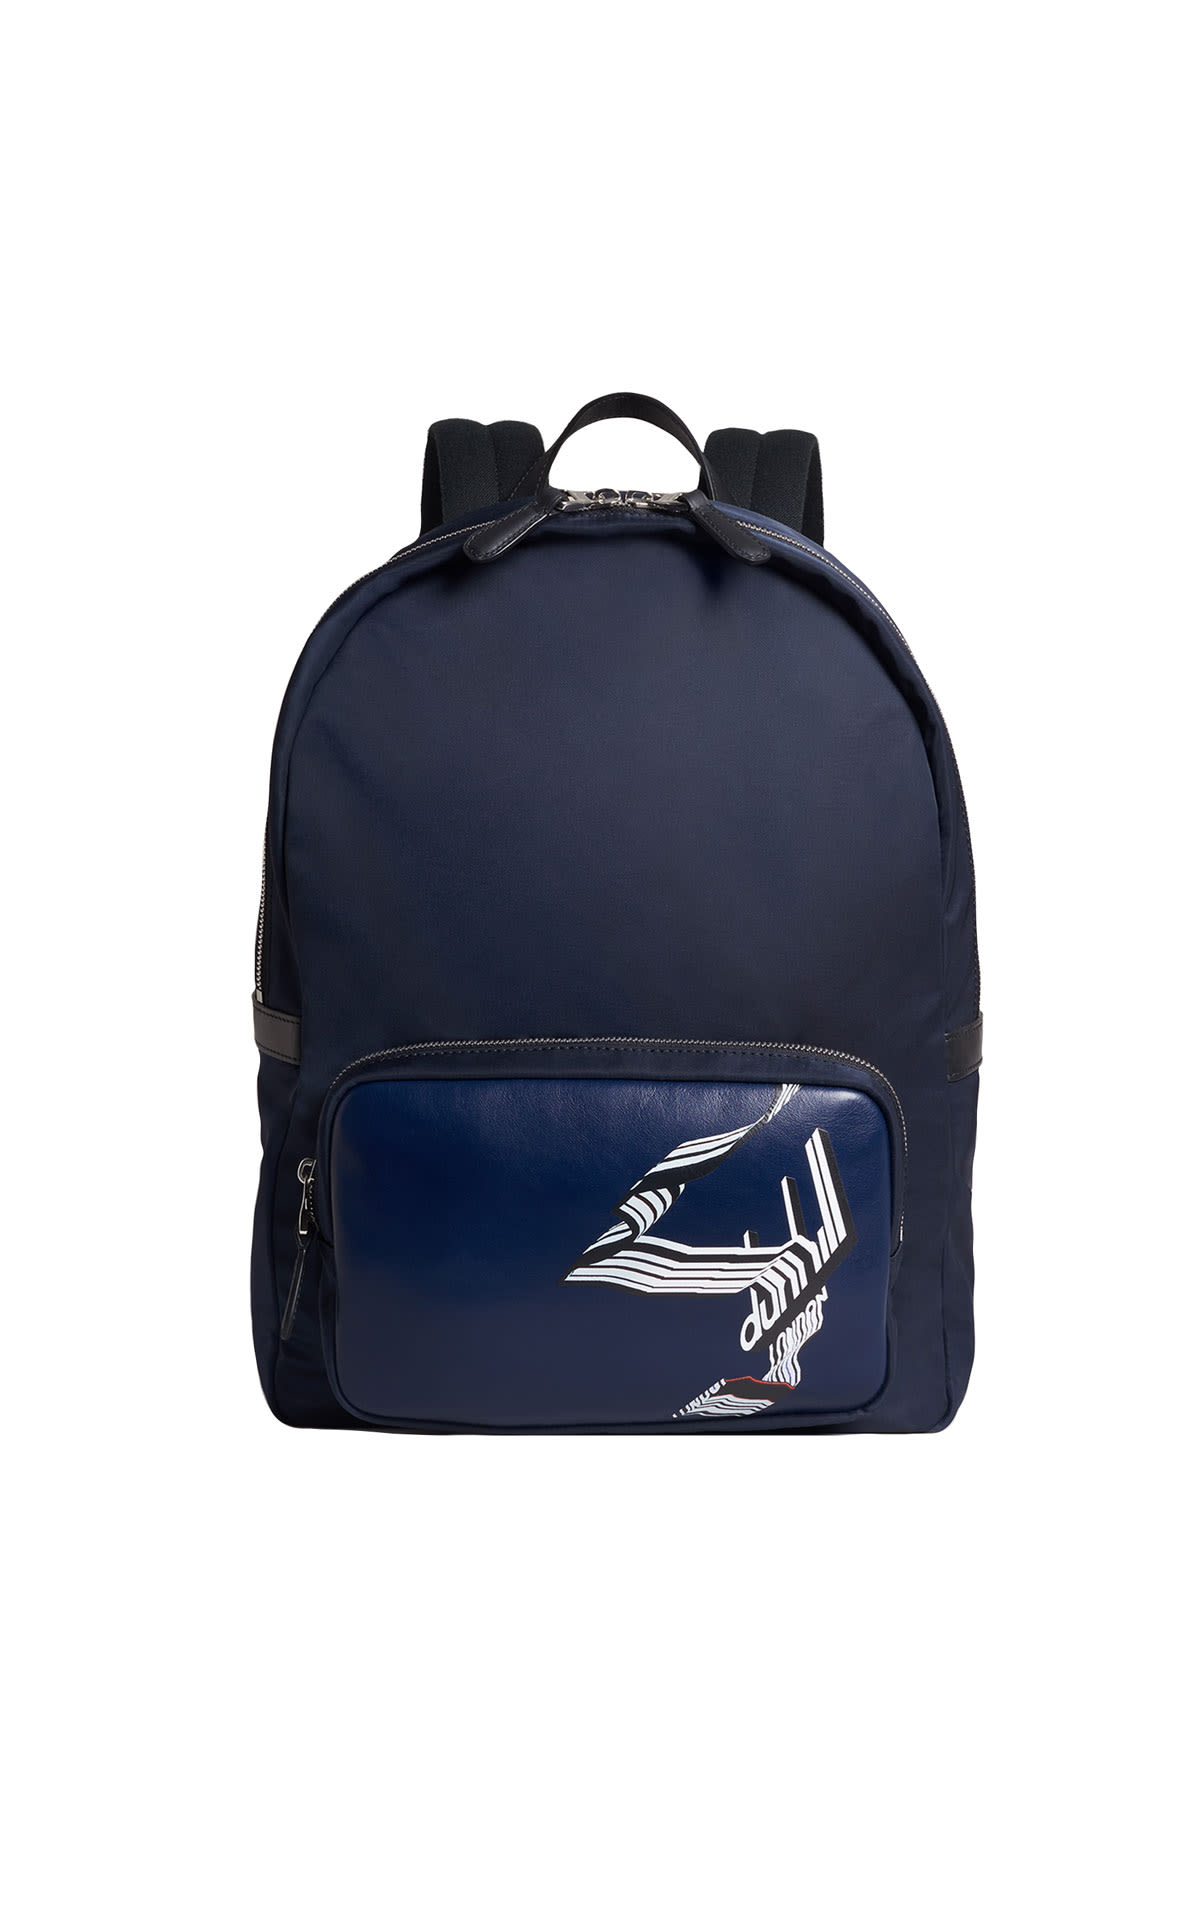 BV_Portrait_1200x1920_Dunhill_Ginza backpack_775_515_Bicester_Village